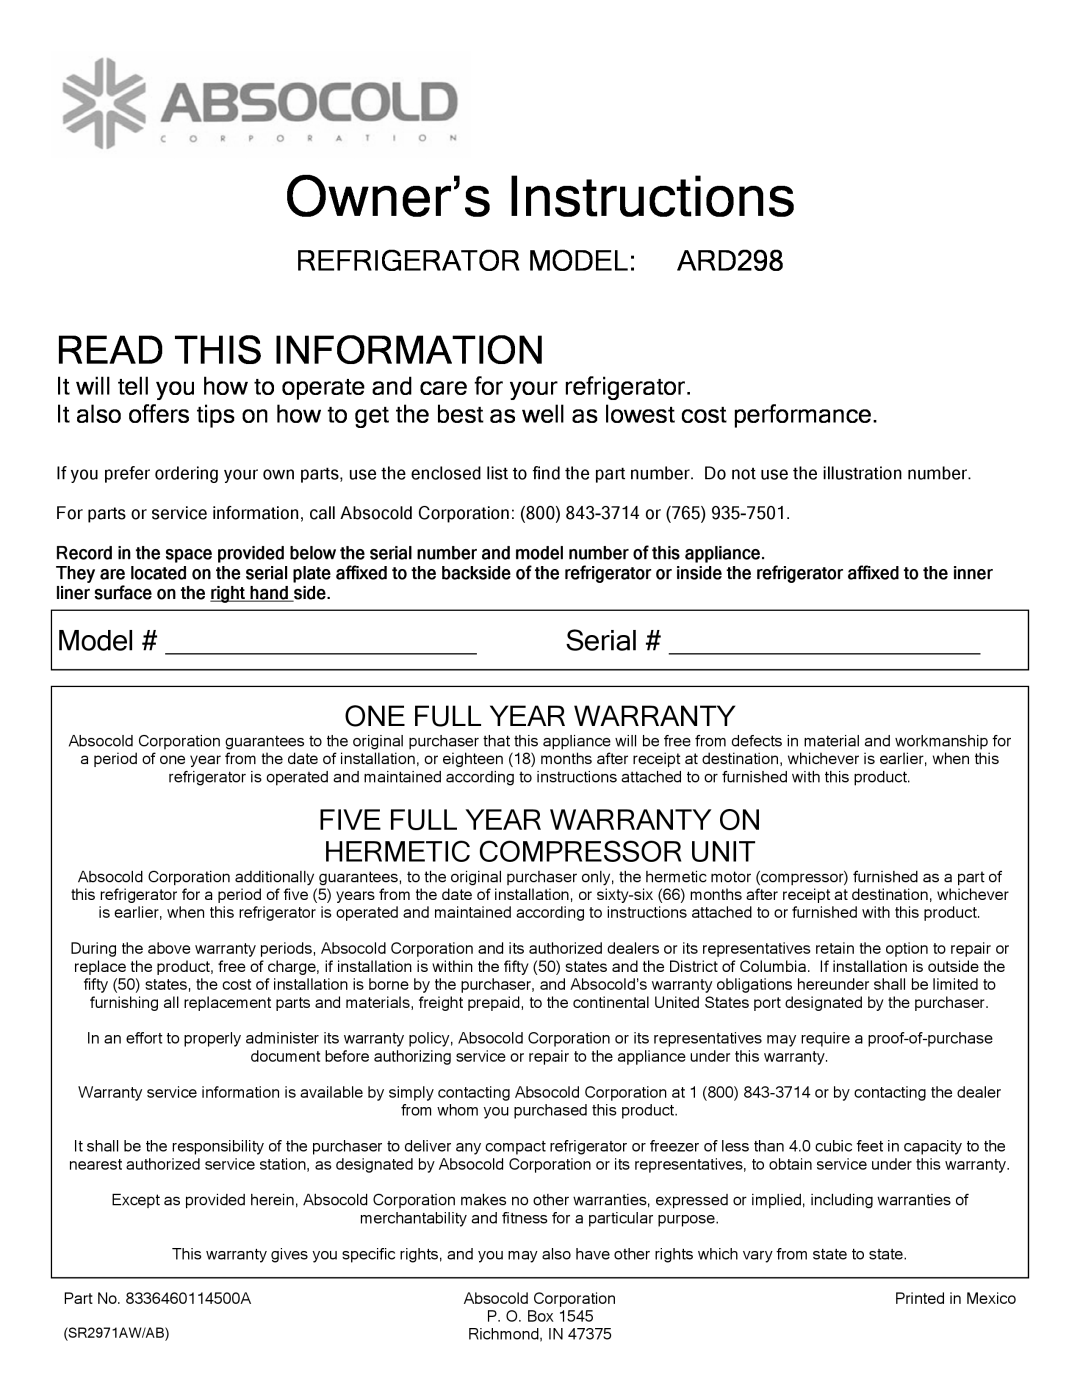 Absocold Corp warranty Owner’s Instructions, Read This Information, REFRIGERATOR MODEL ARD298, Model #, Serial # 